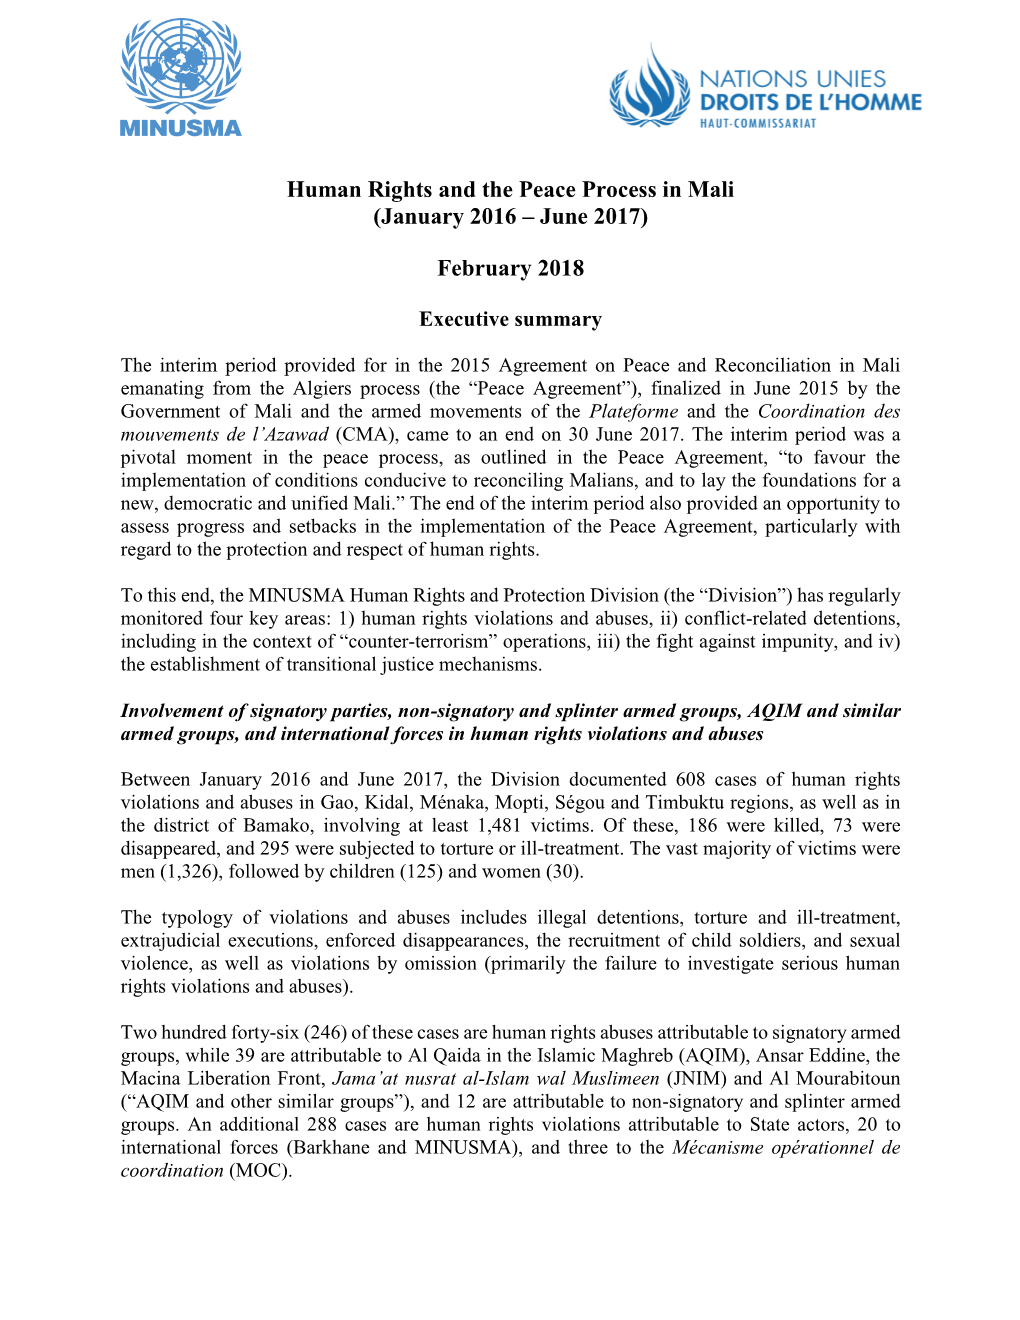 Human Rights and the Peace Process in Mali (January 2016 – June 2017)